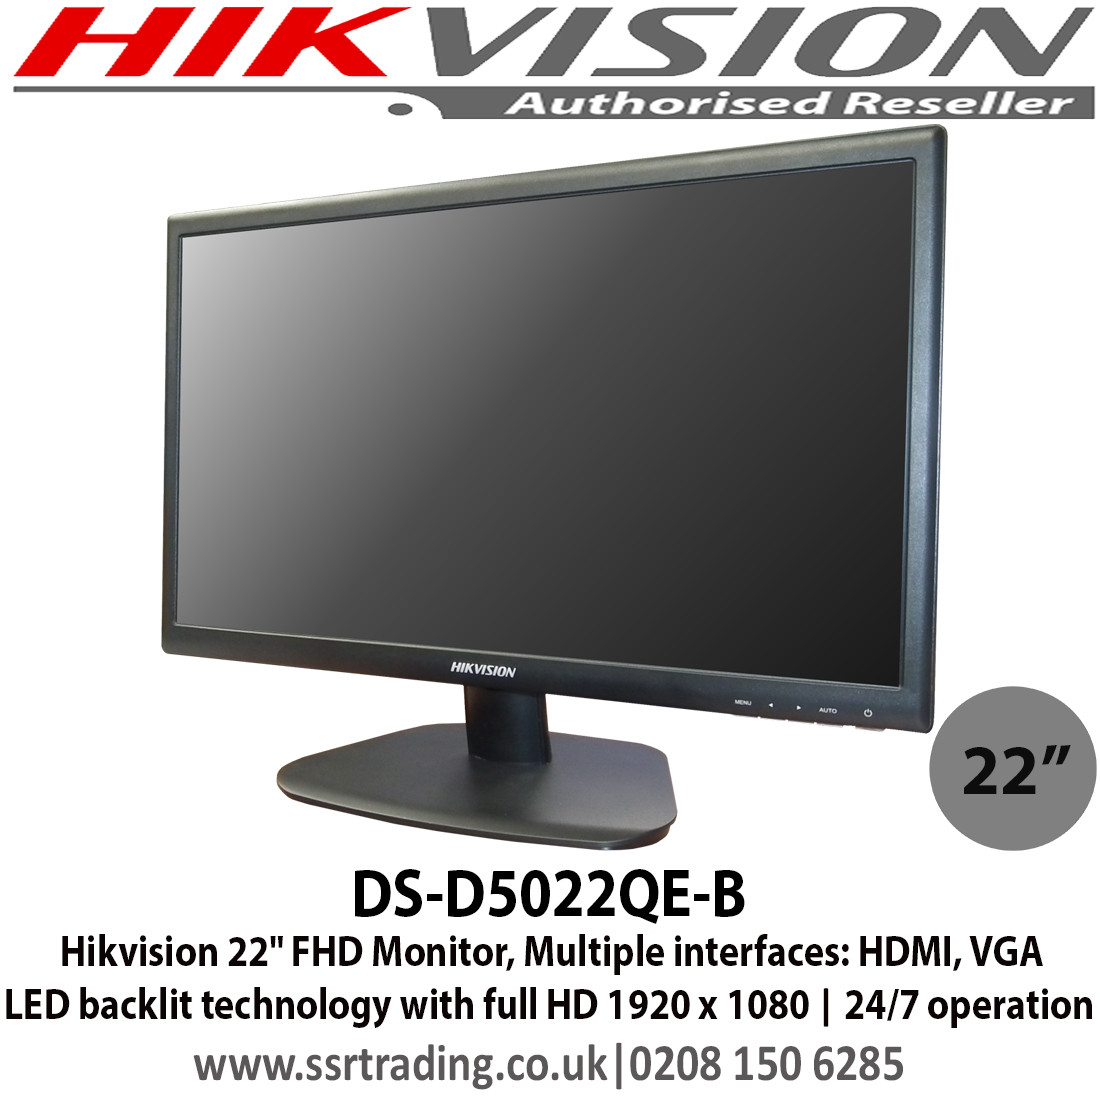 Hikvision 22" FHD Monitor, Multiple interfaces: HDMI, VGA LED backlit  technology with full HD 1920 x 1080, 24/7 operation - DS-D5022QE-B